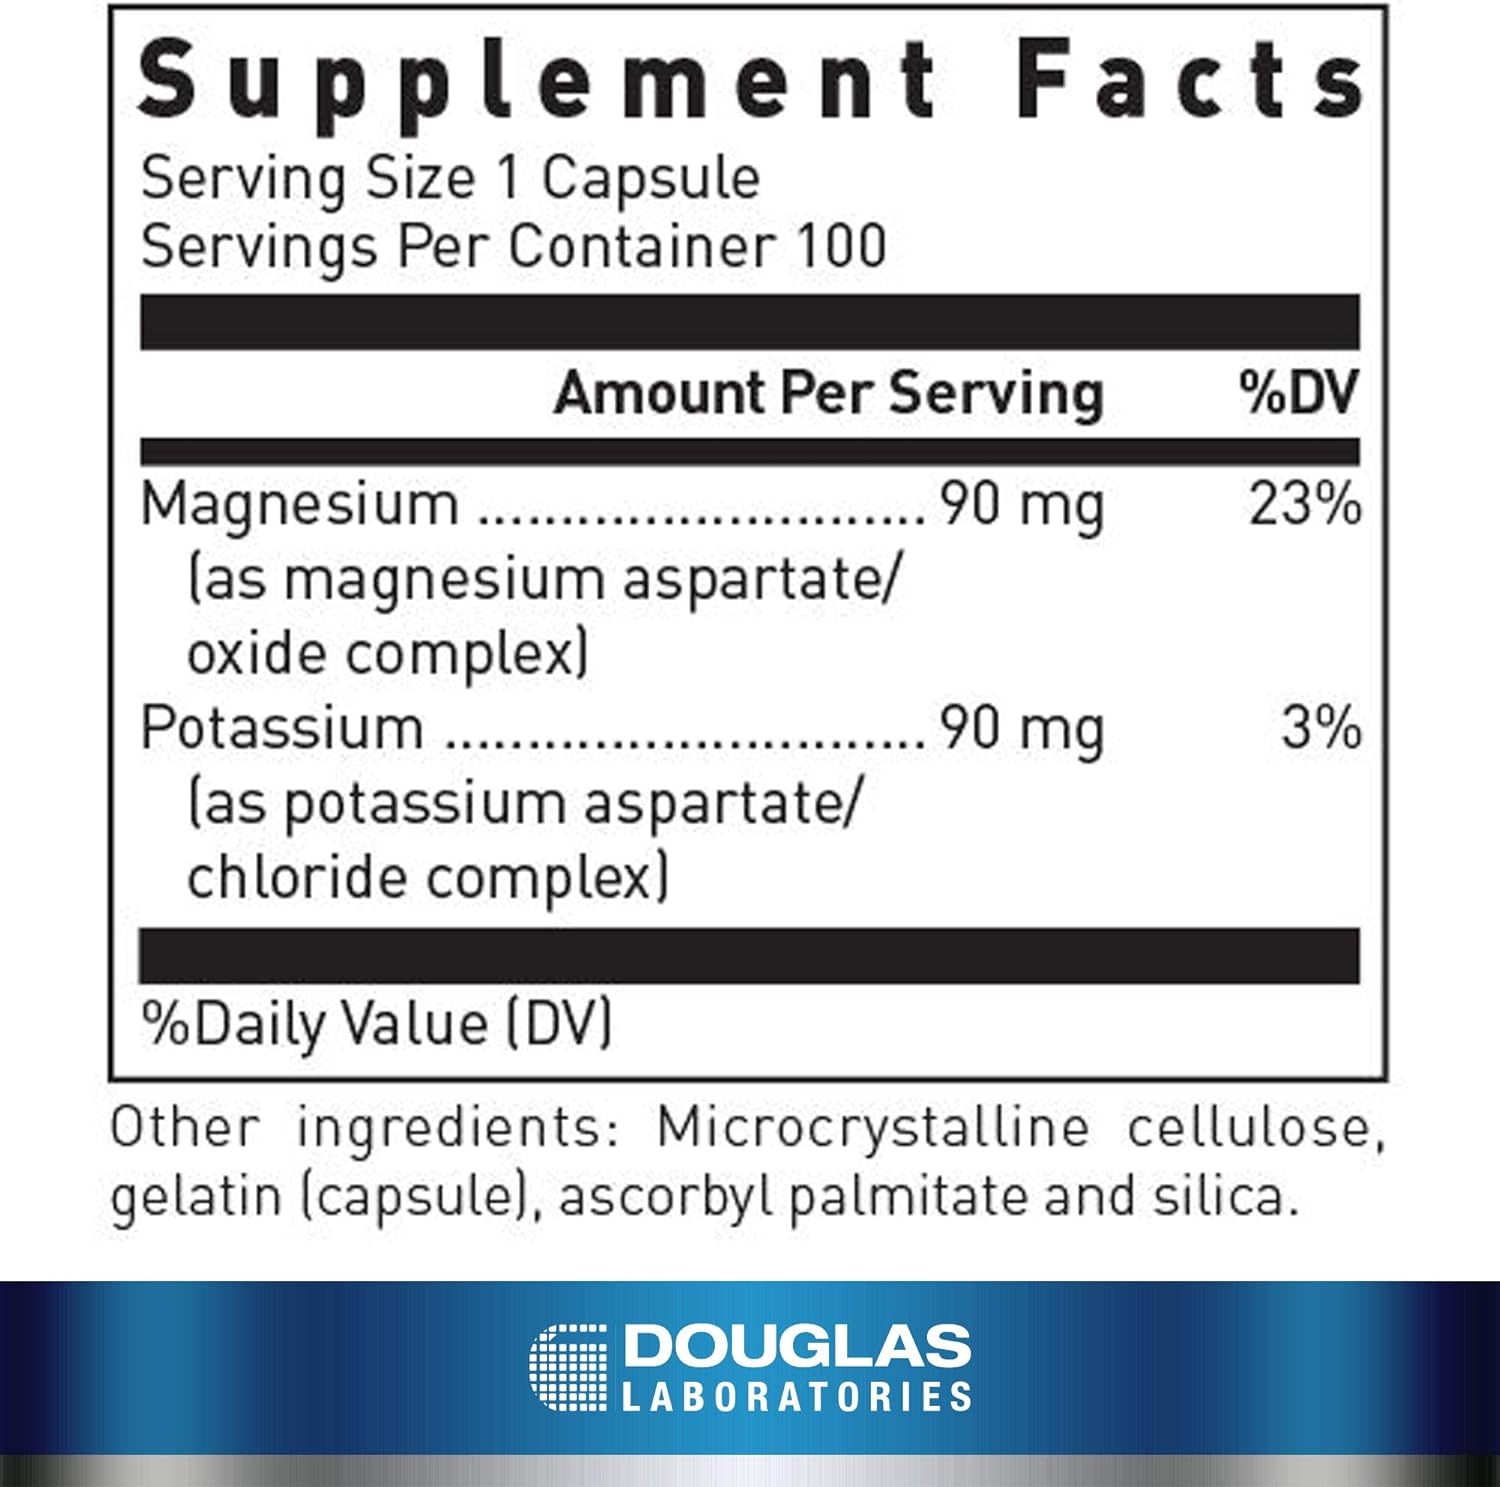 Douglas Laboratories - Magnesium/Potassium Complex - Supports Cardiovascular Health and Skeletal Muscle Contractility - 250 Capsules